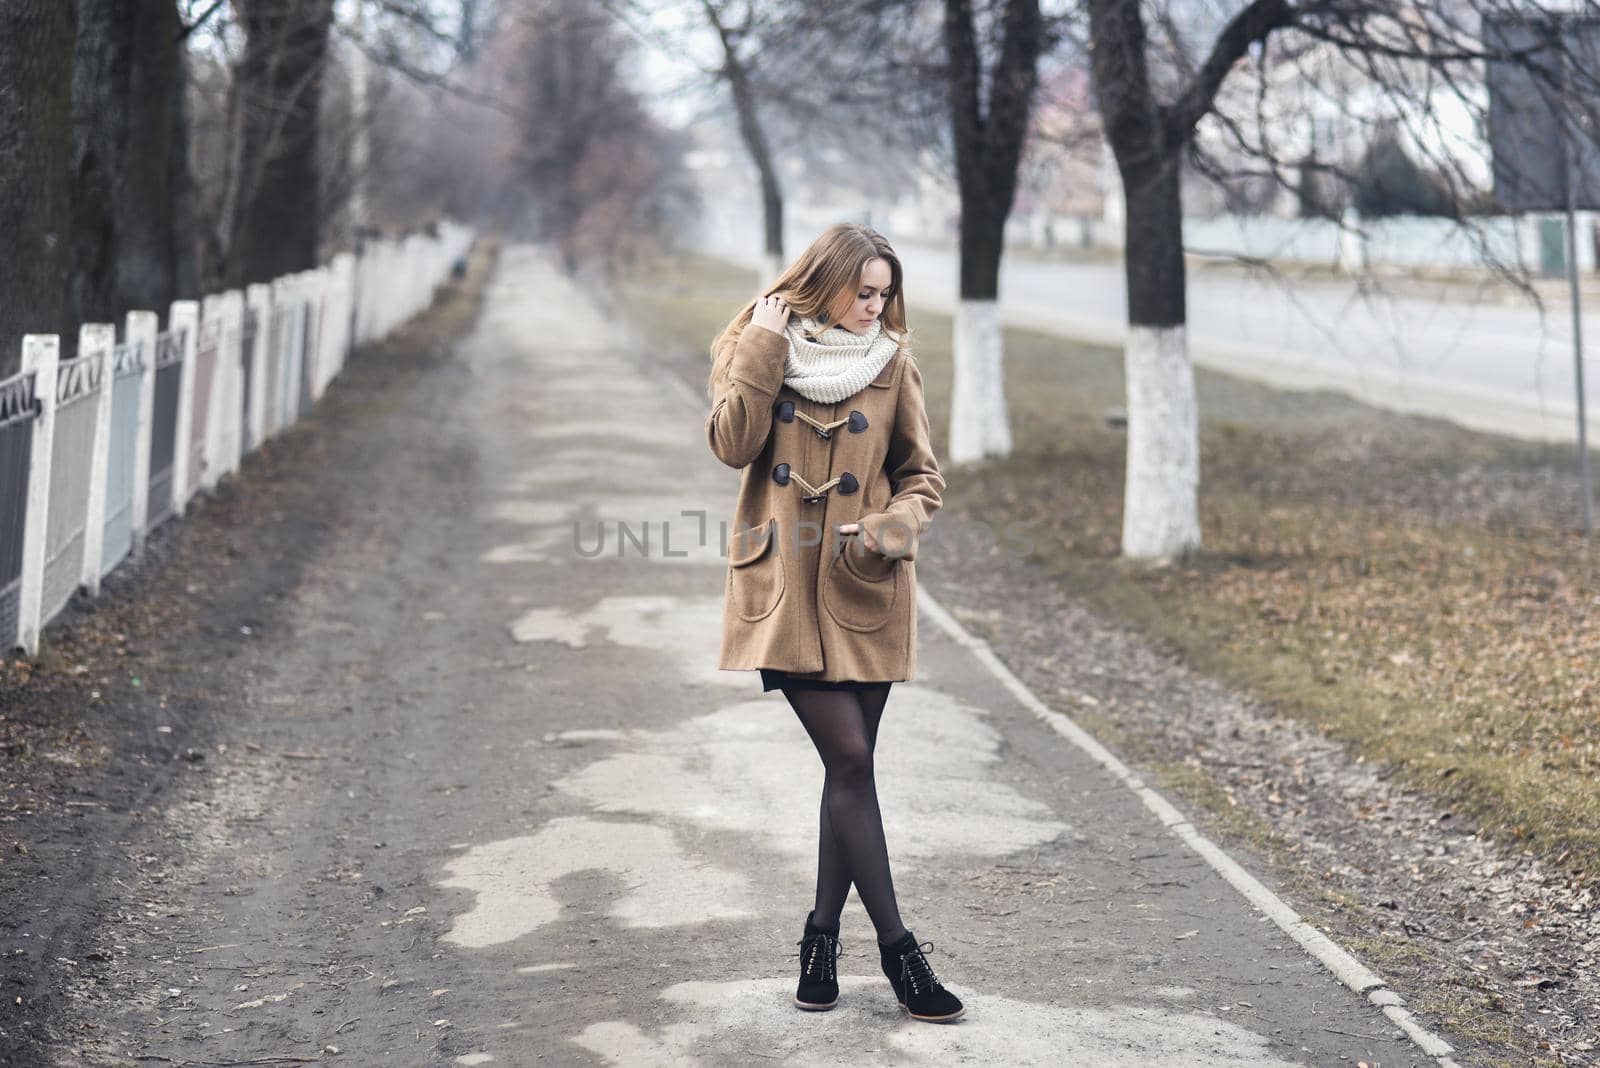 Blond-haired young girl cheerful joyful dressed you in a beige coat and white scarf. Autumn gray street on the background. empty road